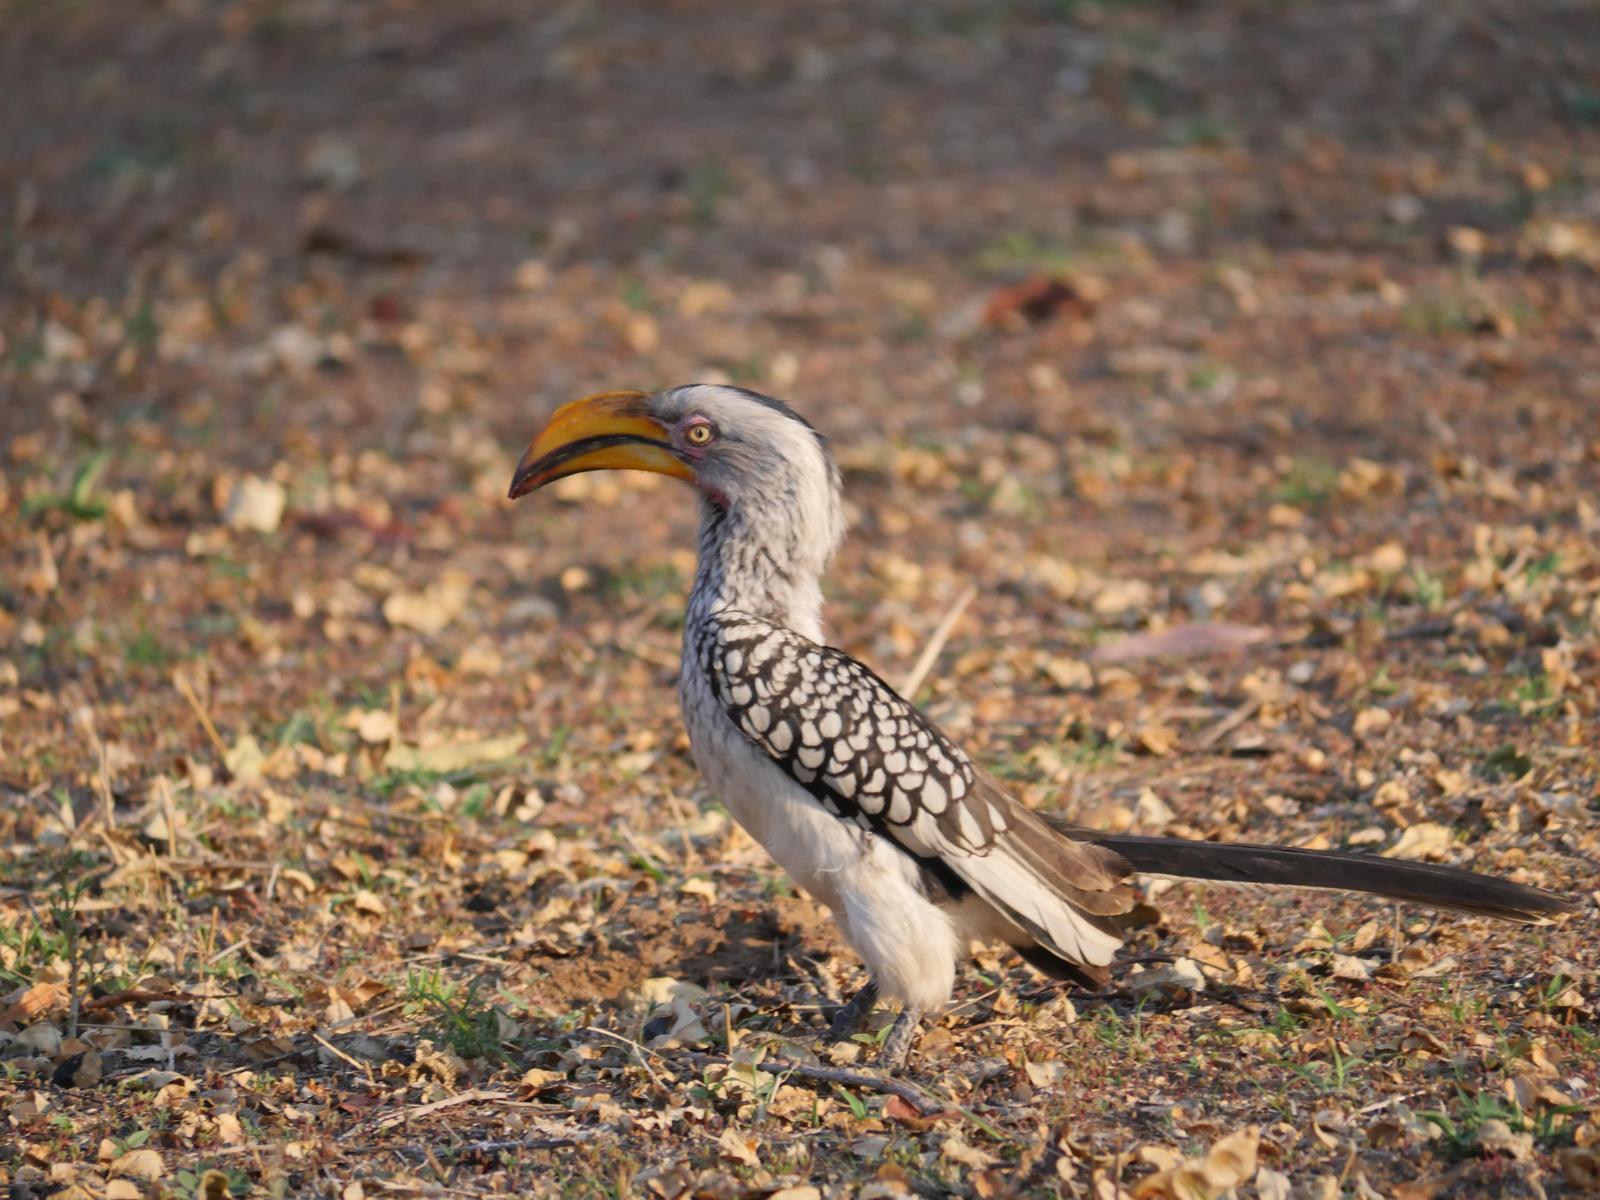 Southern Yellow-billed Hornbill Photo by Peter Lowe